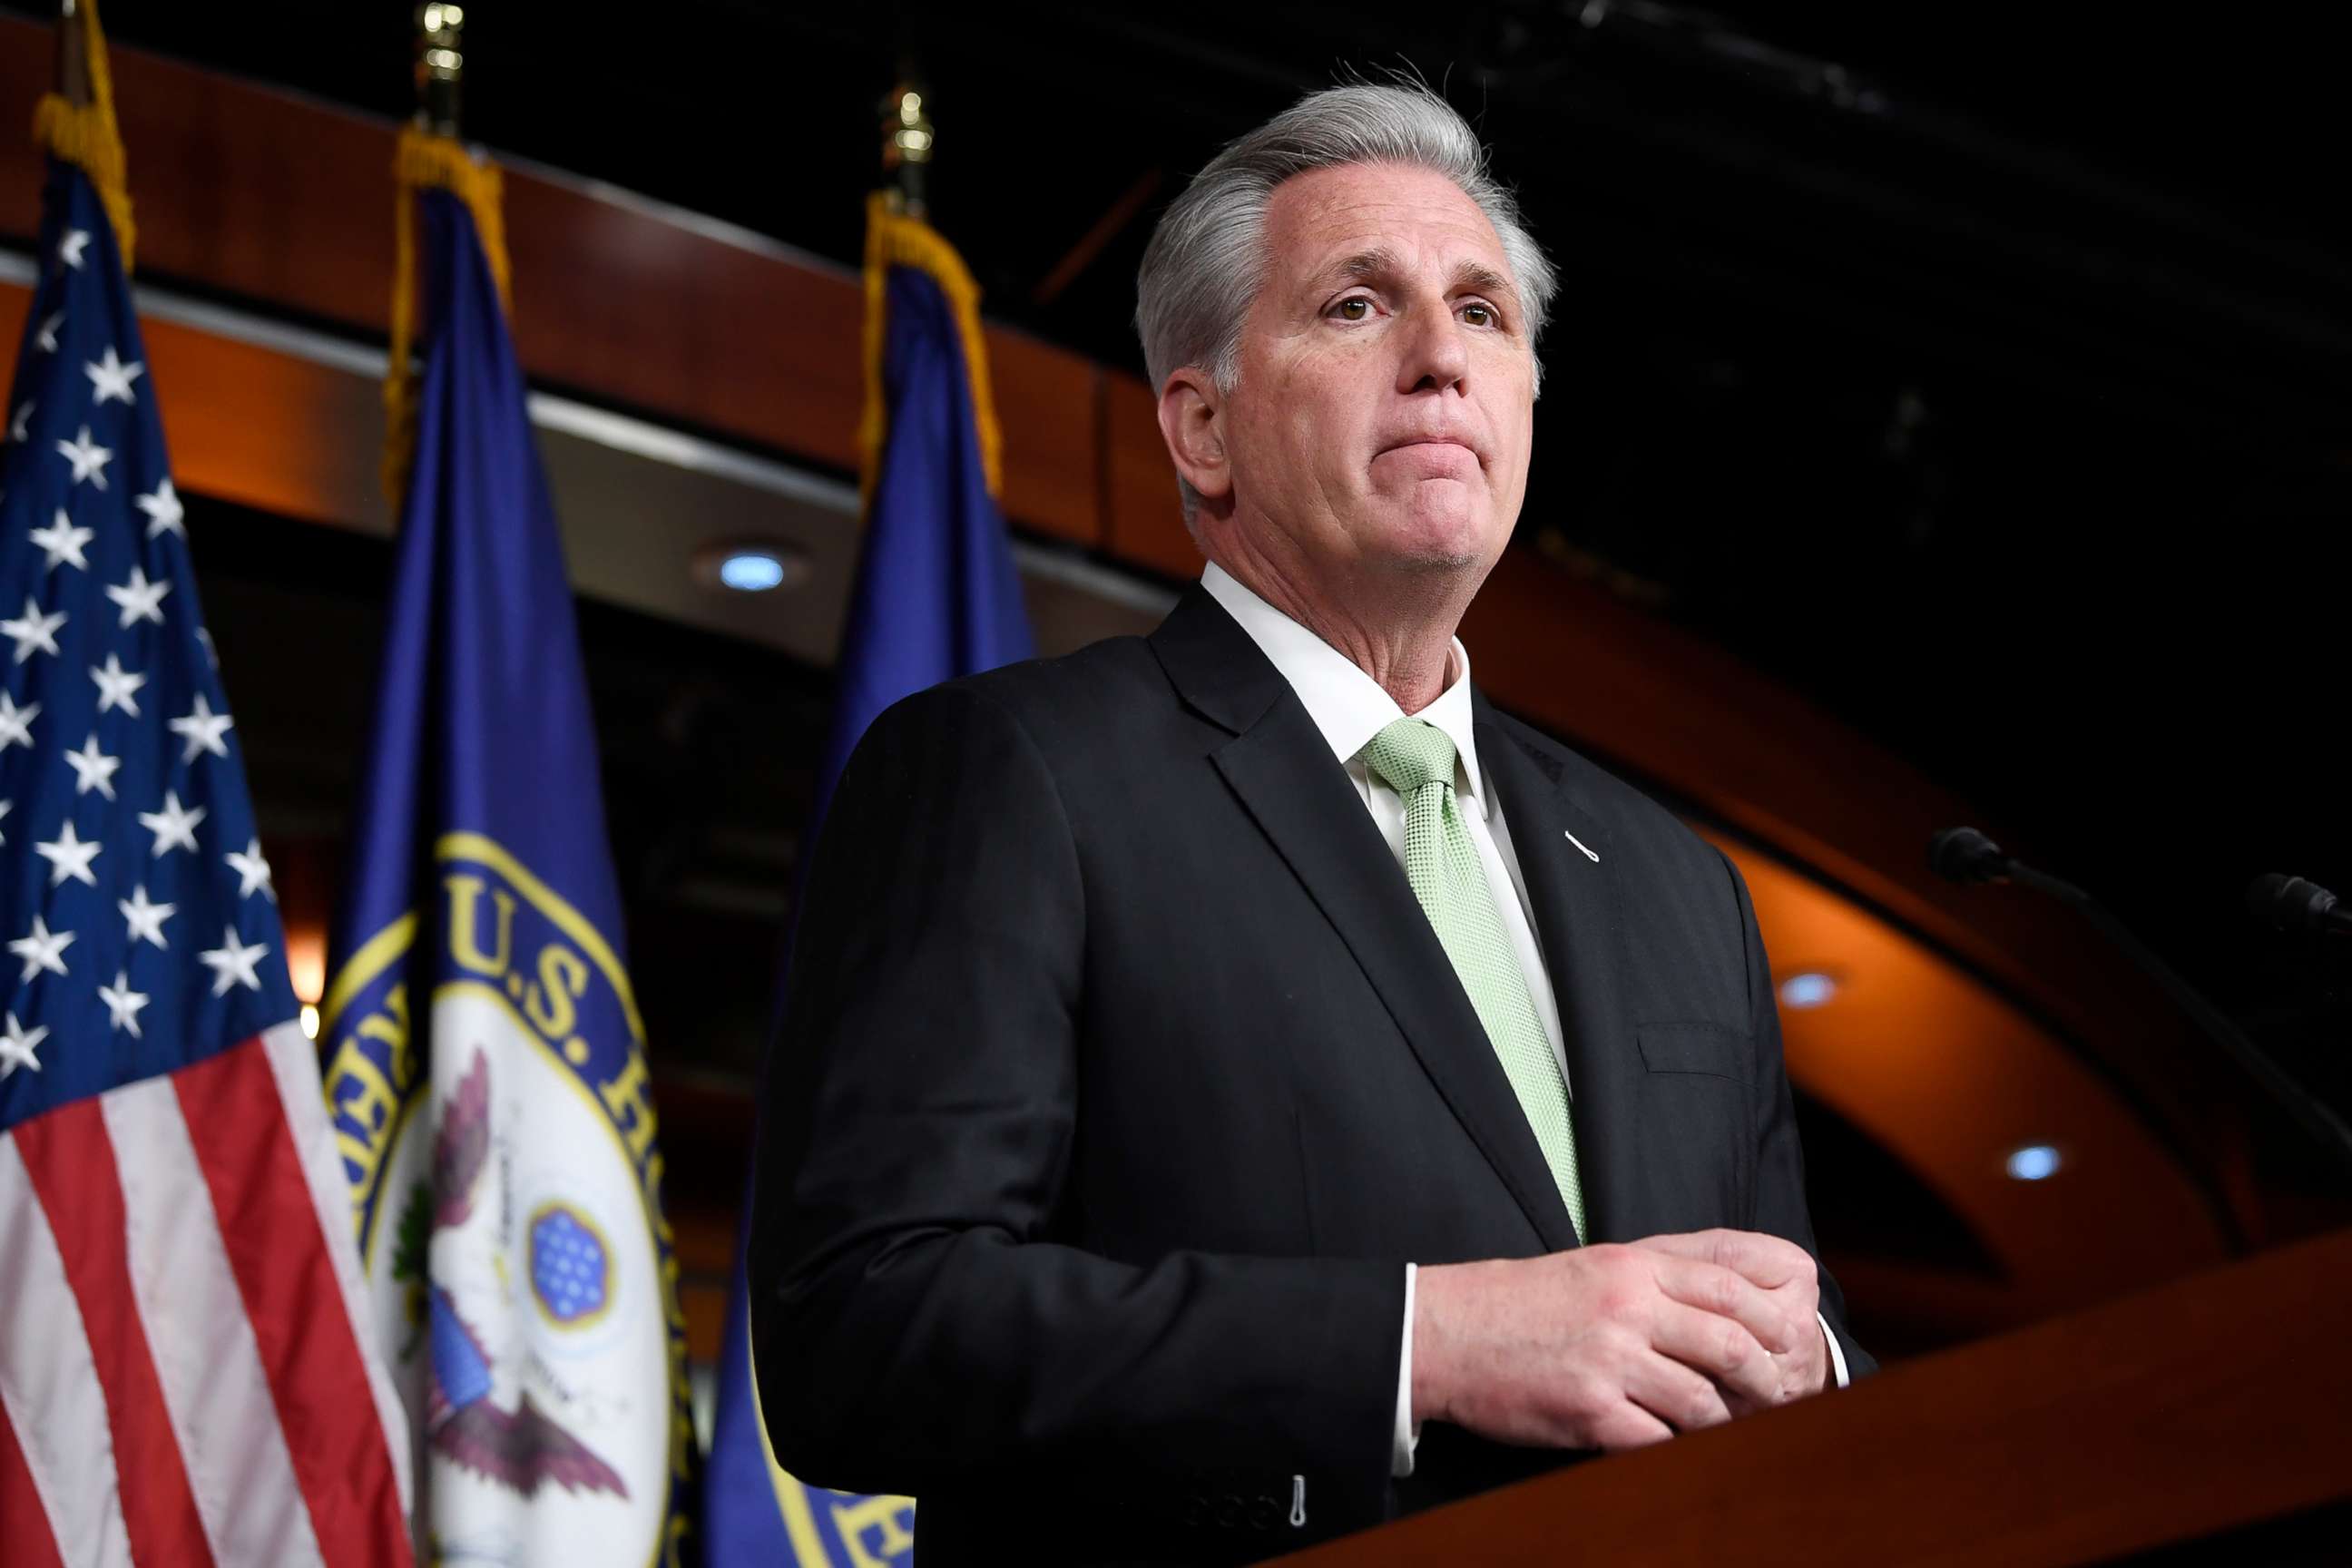 PHOTO: House Minority Leader Kevin McCarthy of Calif., speaks during a news conference on Capitol Hill in Washington, D.C., Dec. 19, 2019.